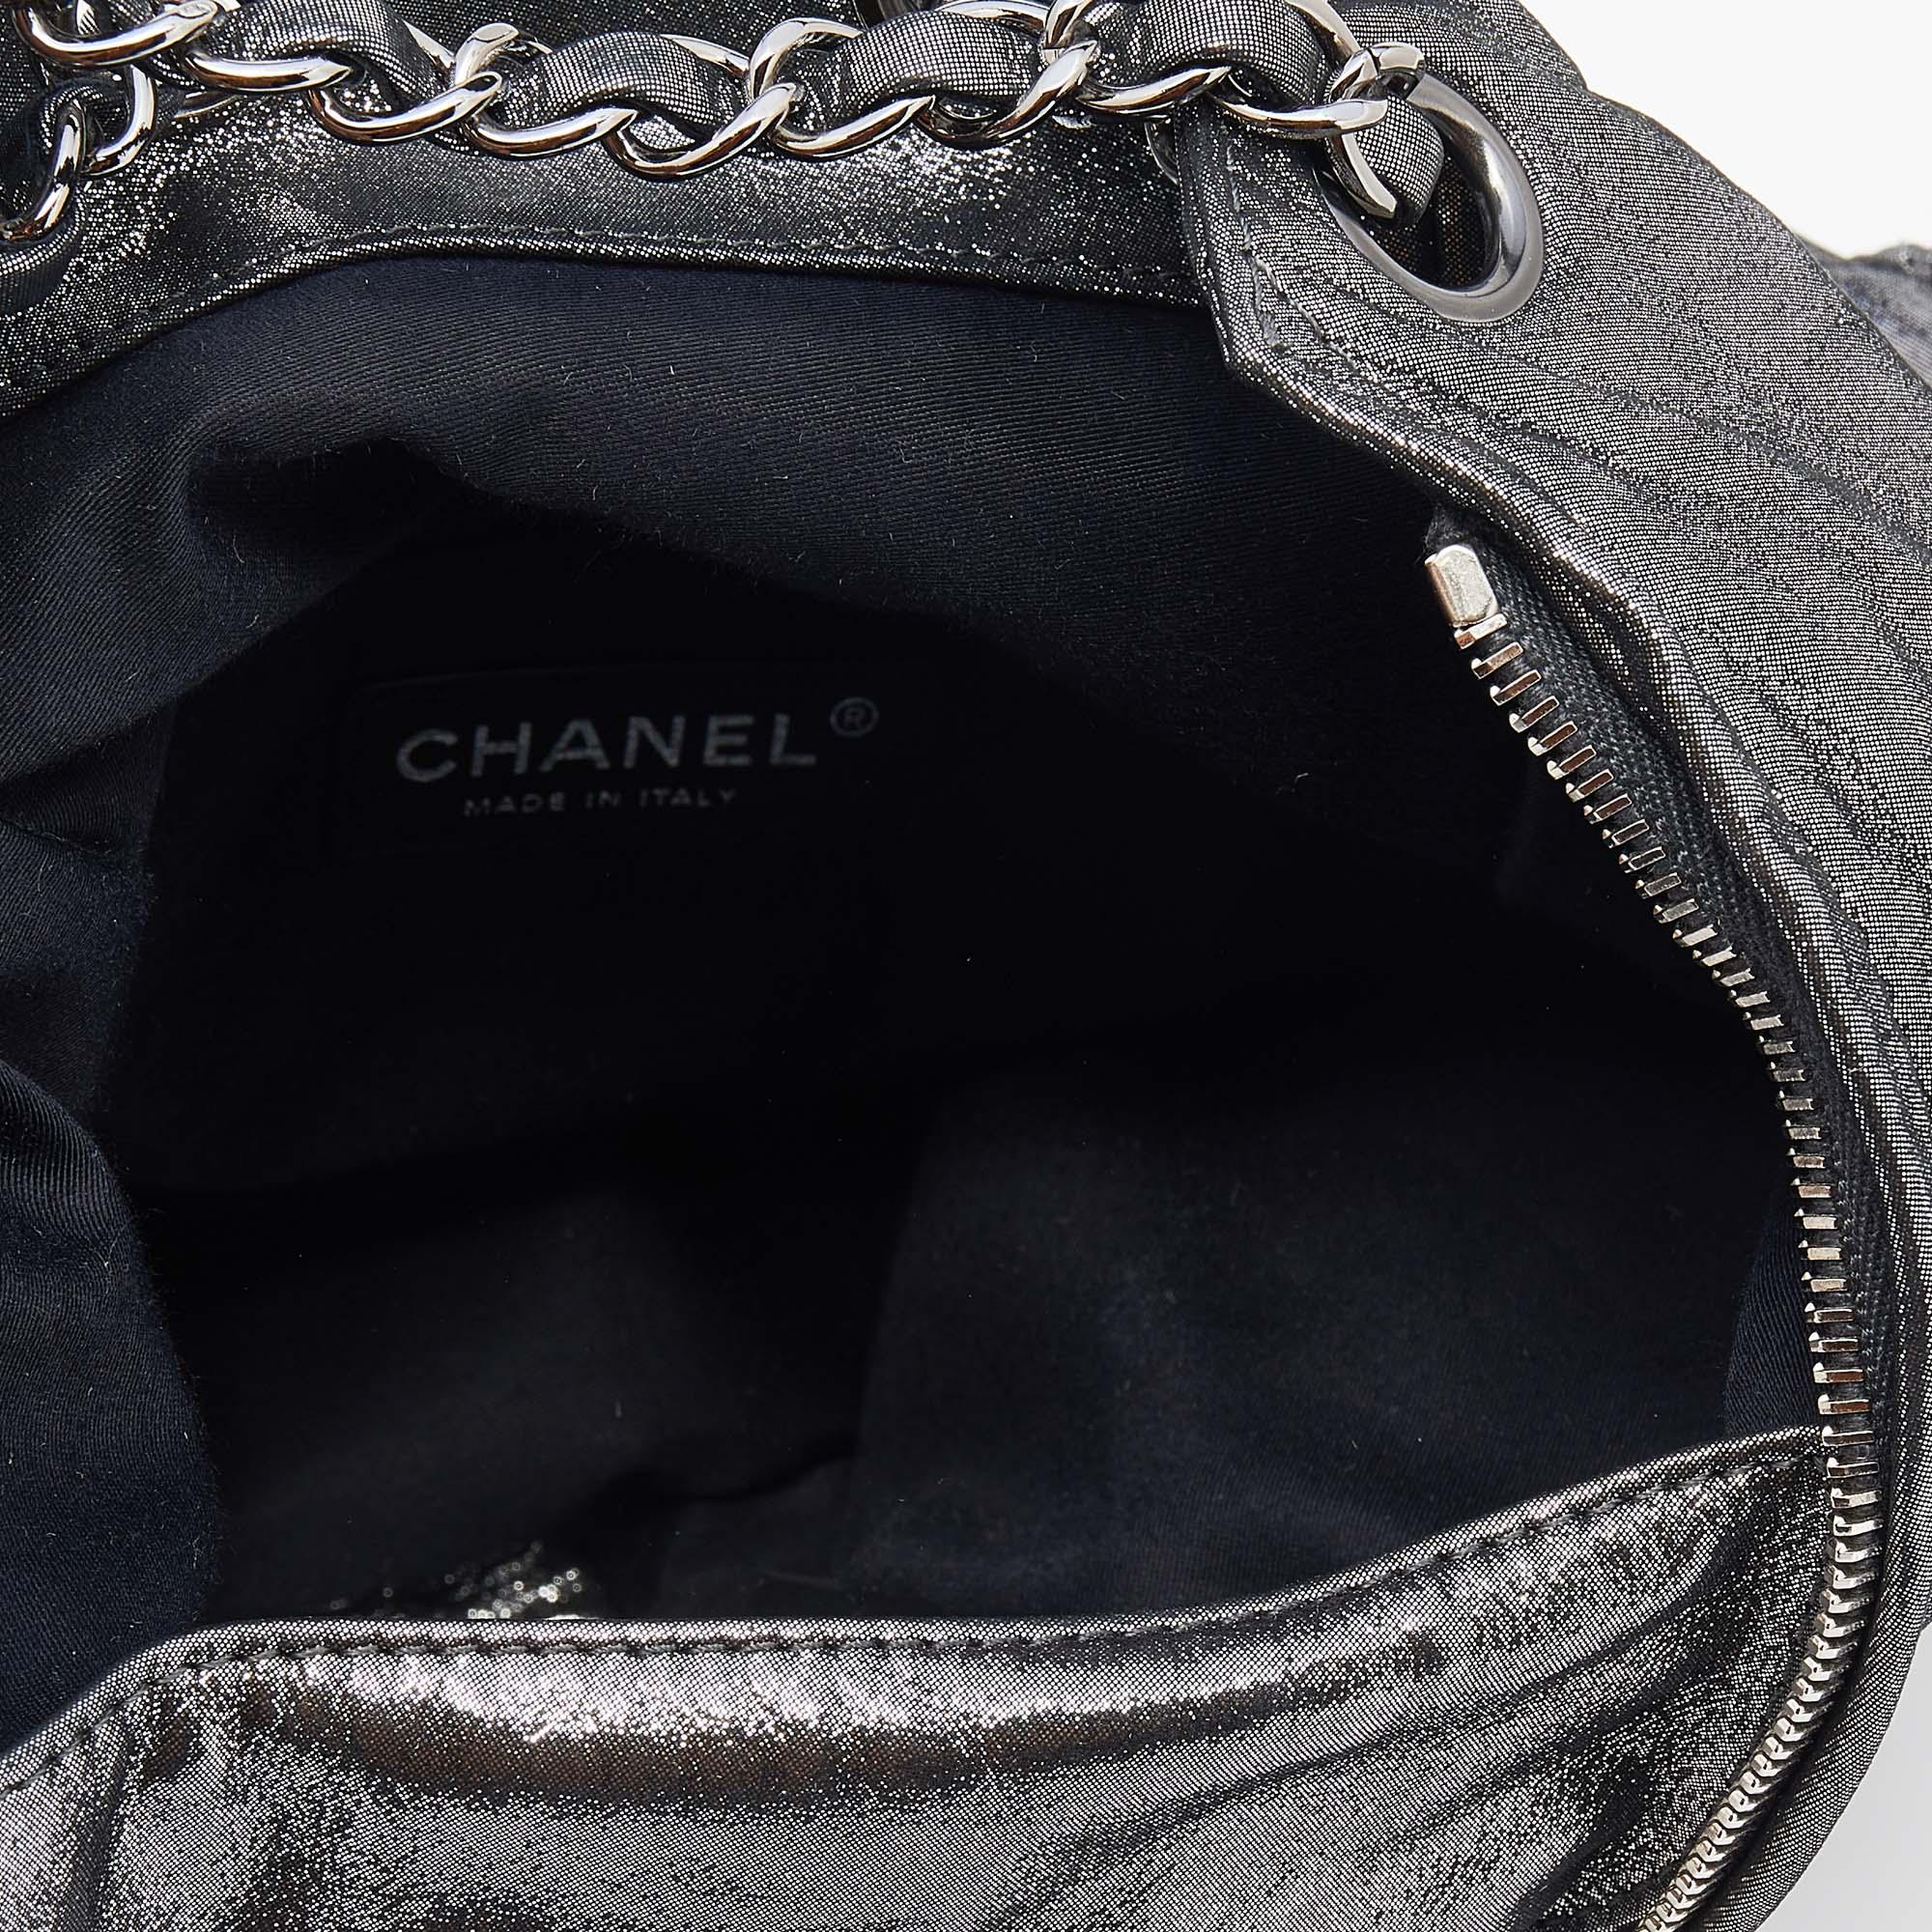 Chanel Metallic Dark Silver Quilted Leather Large Backpack is Back Backpack 2